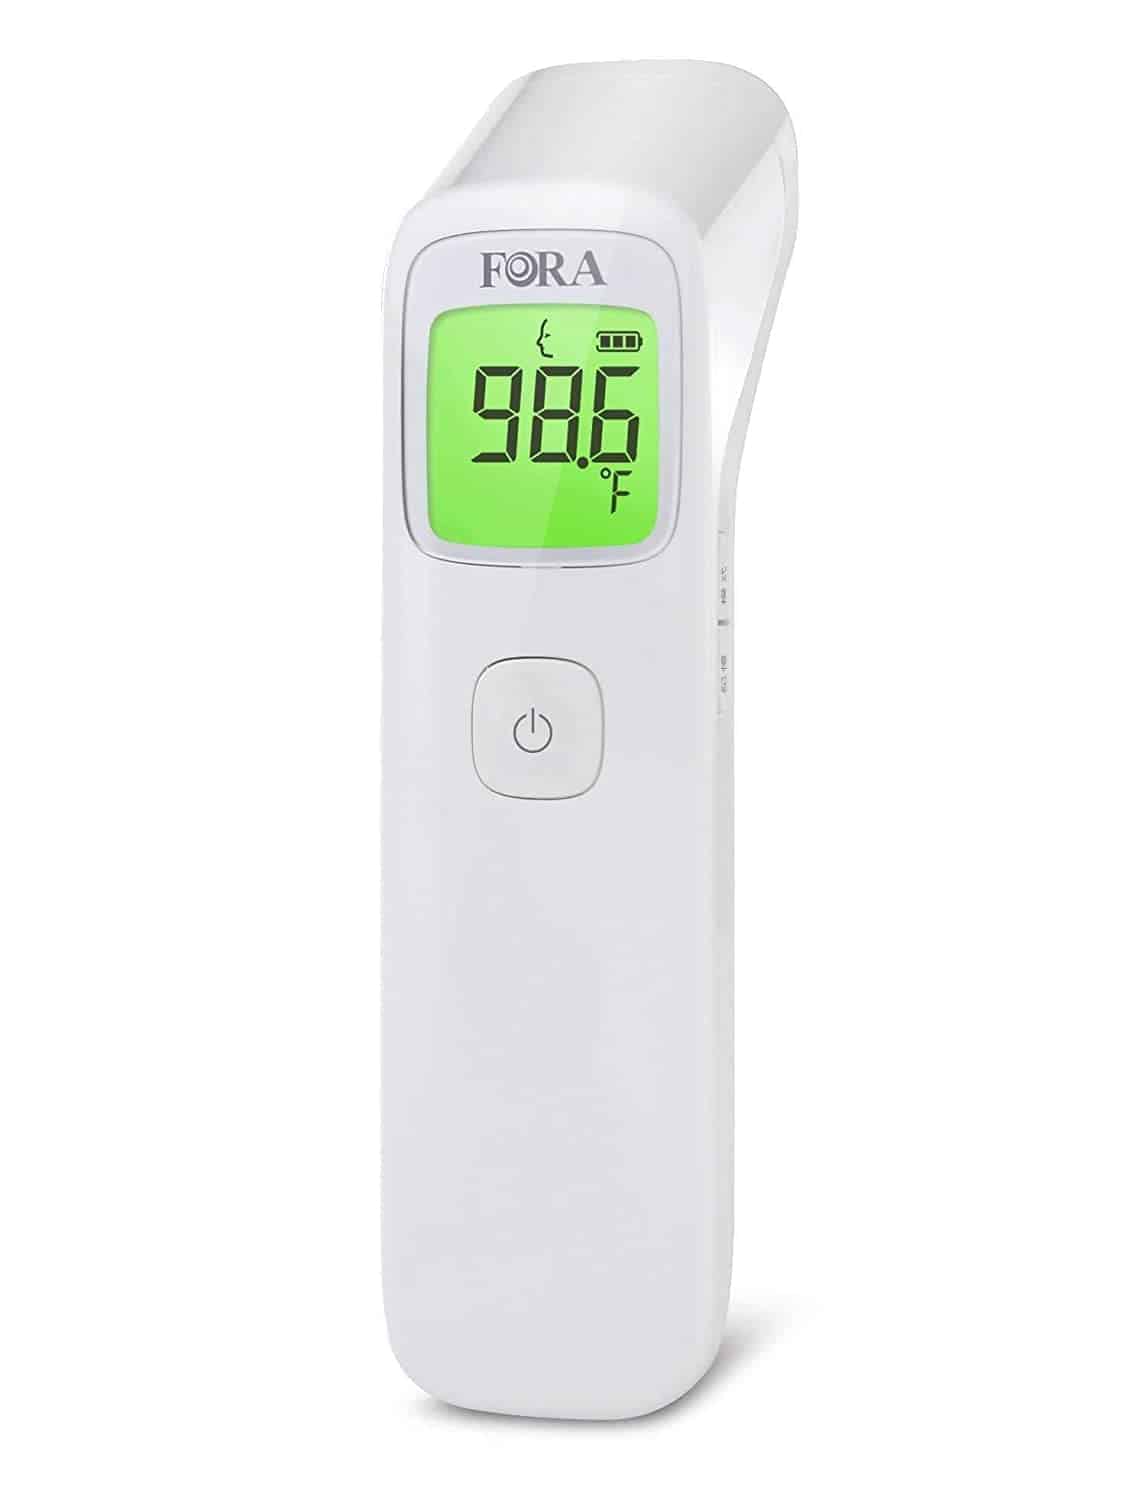 FORA IR42 Medical Grade Non-Contact Forehead Thermometer